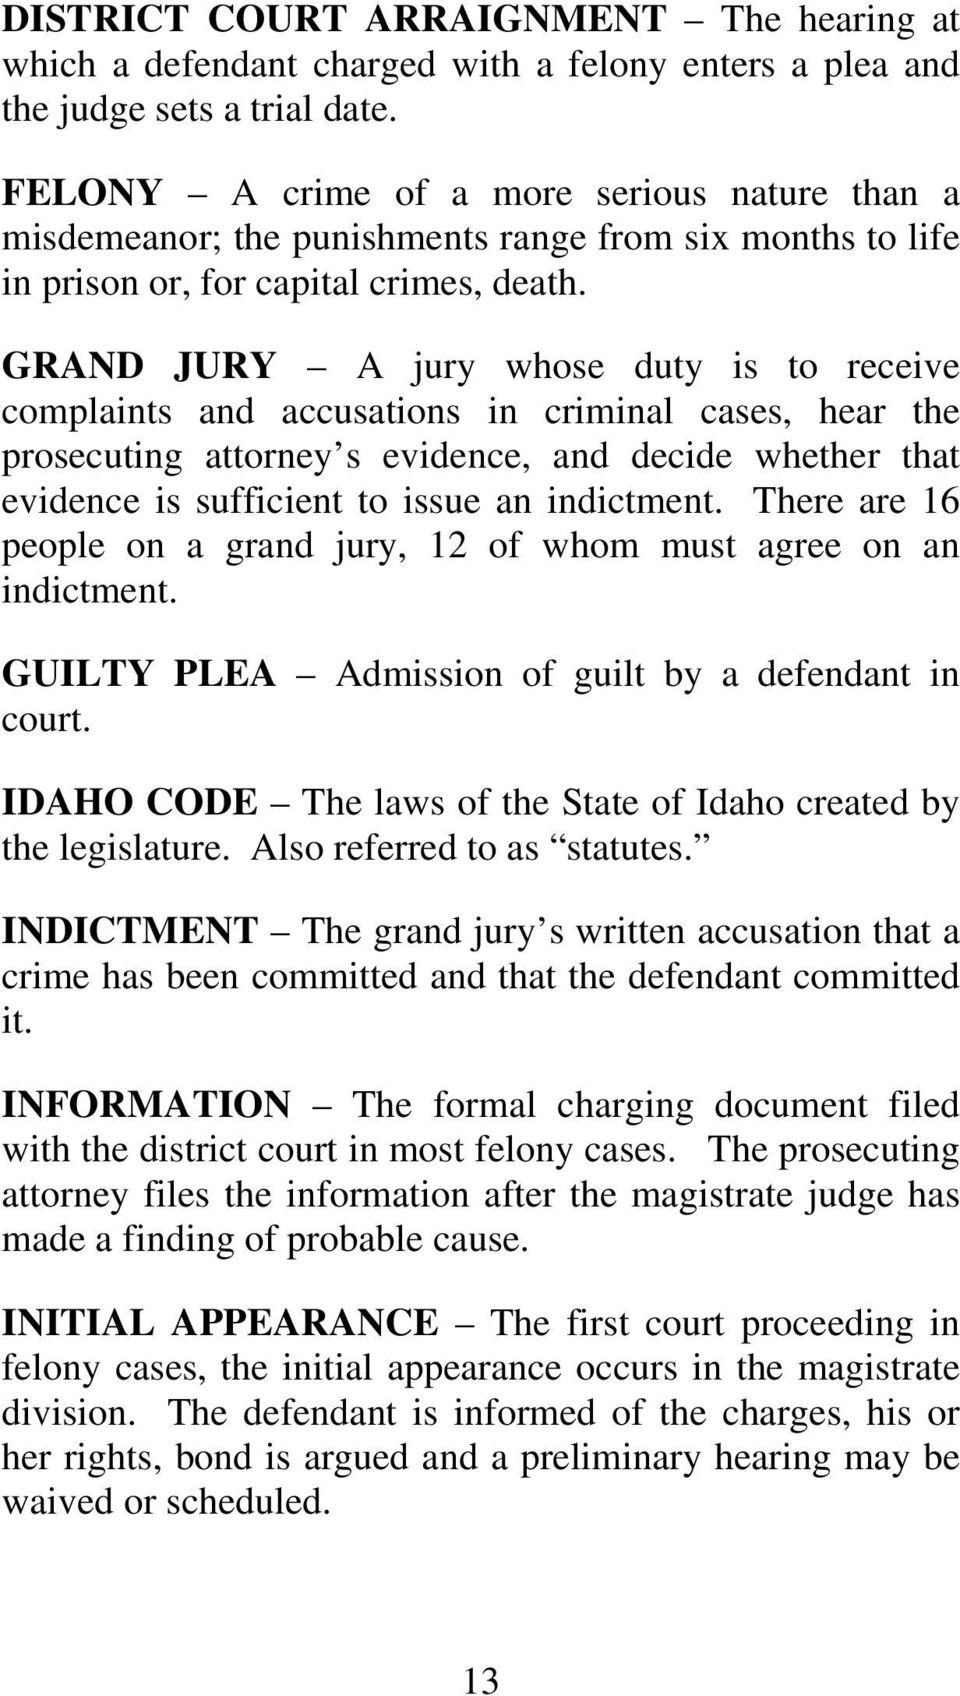 GRAND JURY A jury whose duty is to receive complaints and accusations in criminal cases, hear the prosecuting attorney s evidence, and decide whether that evidence is sufficient to issue an